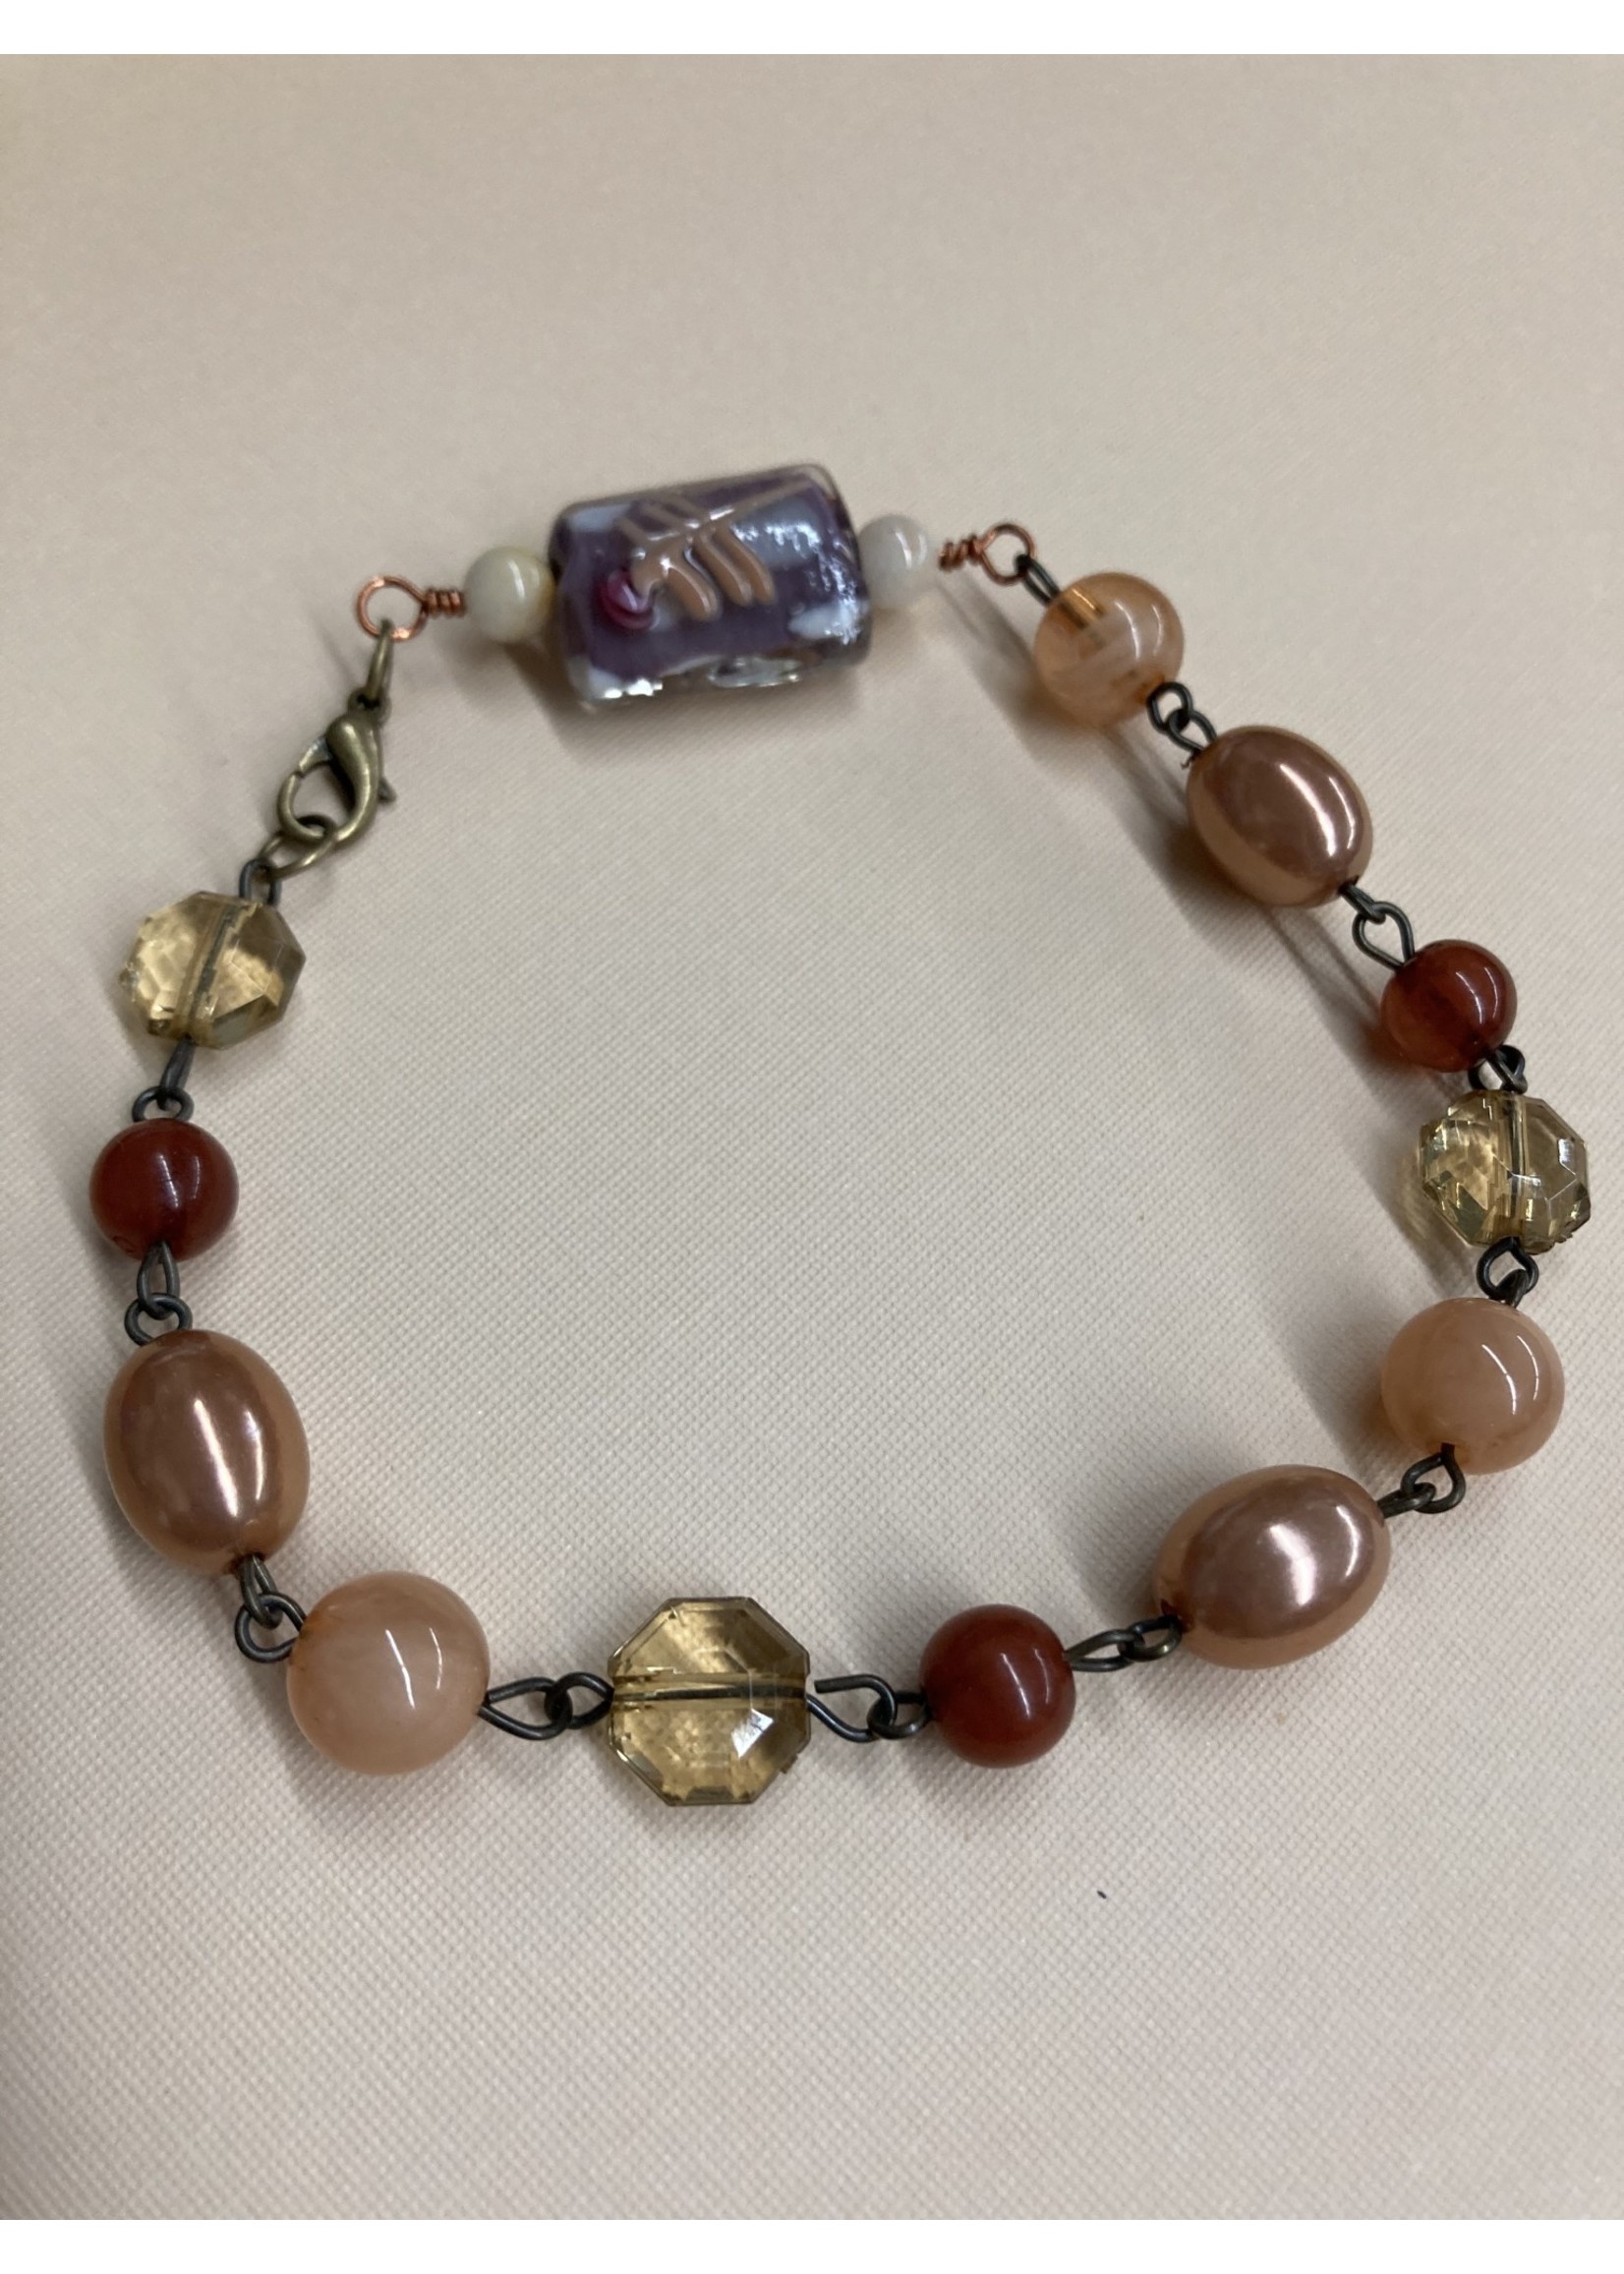 Our Twisted Dahlia B010 Amber, Tan, and Lampworked Focal Bracelet